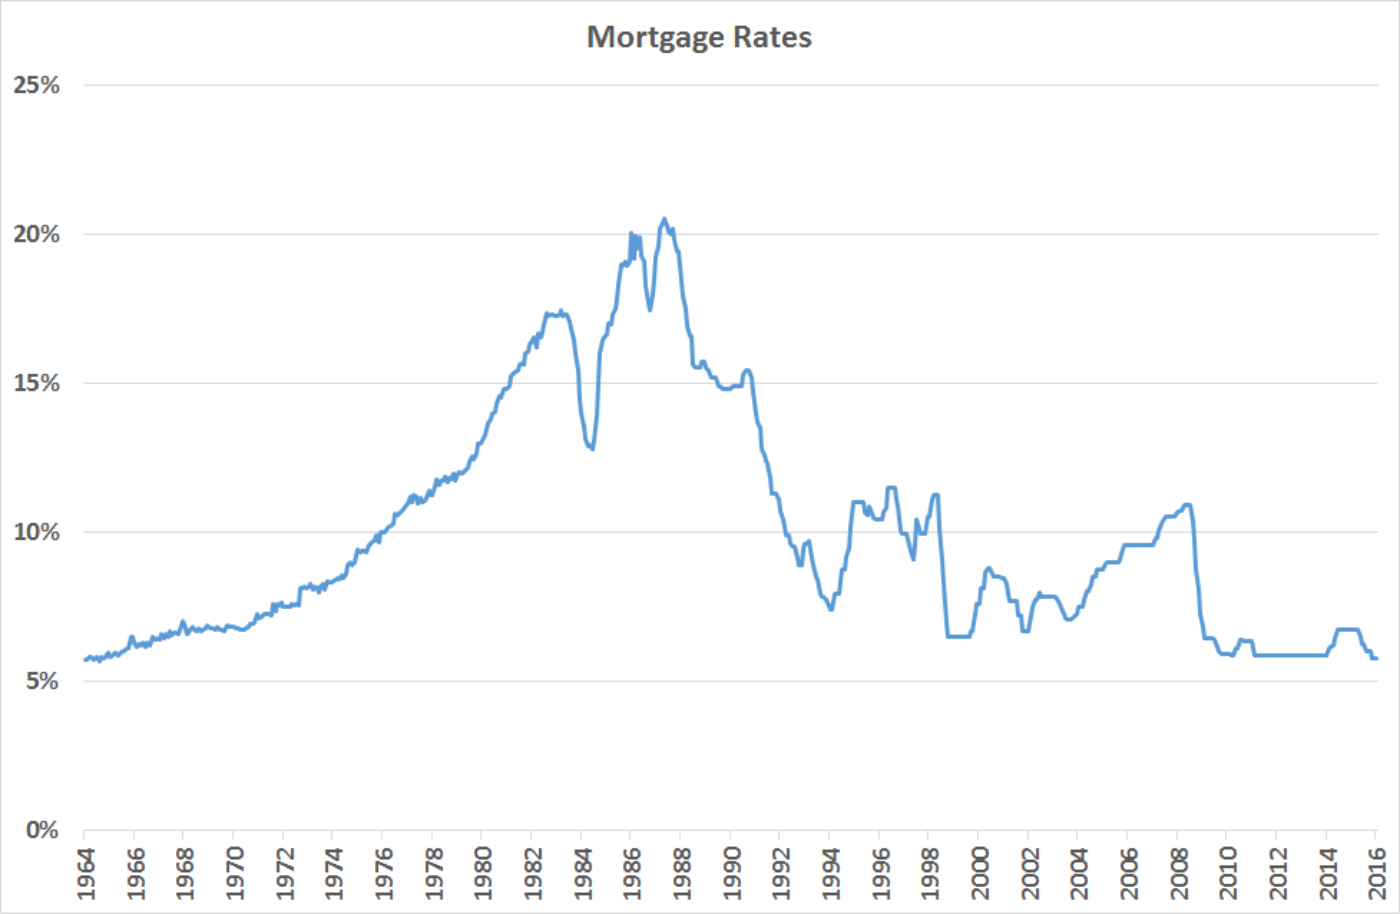 Interest Rates Calculated on Mortgages From 1964 to 2016